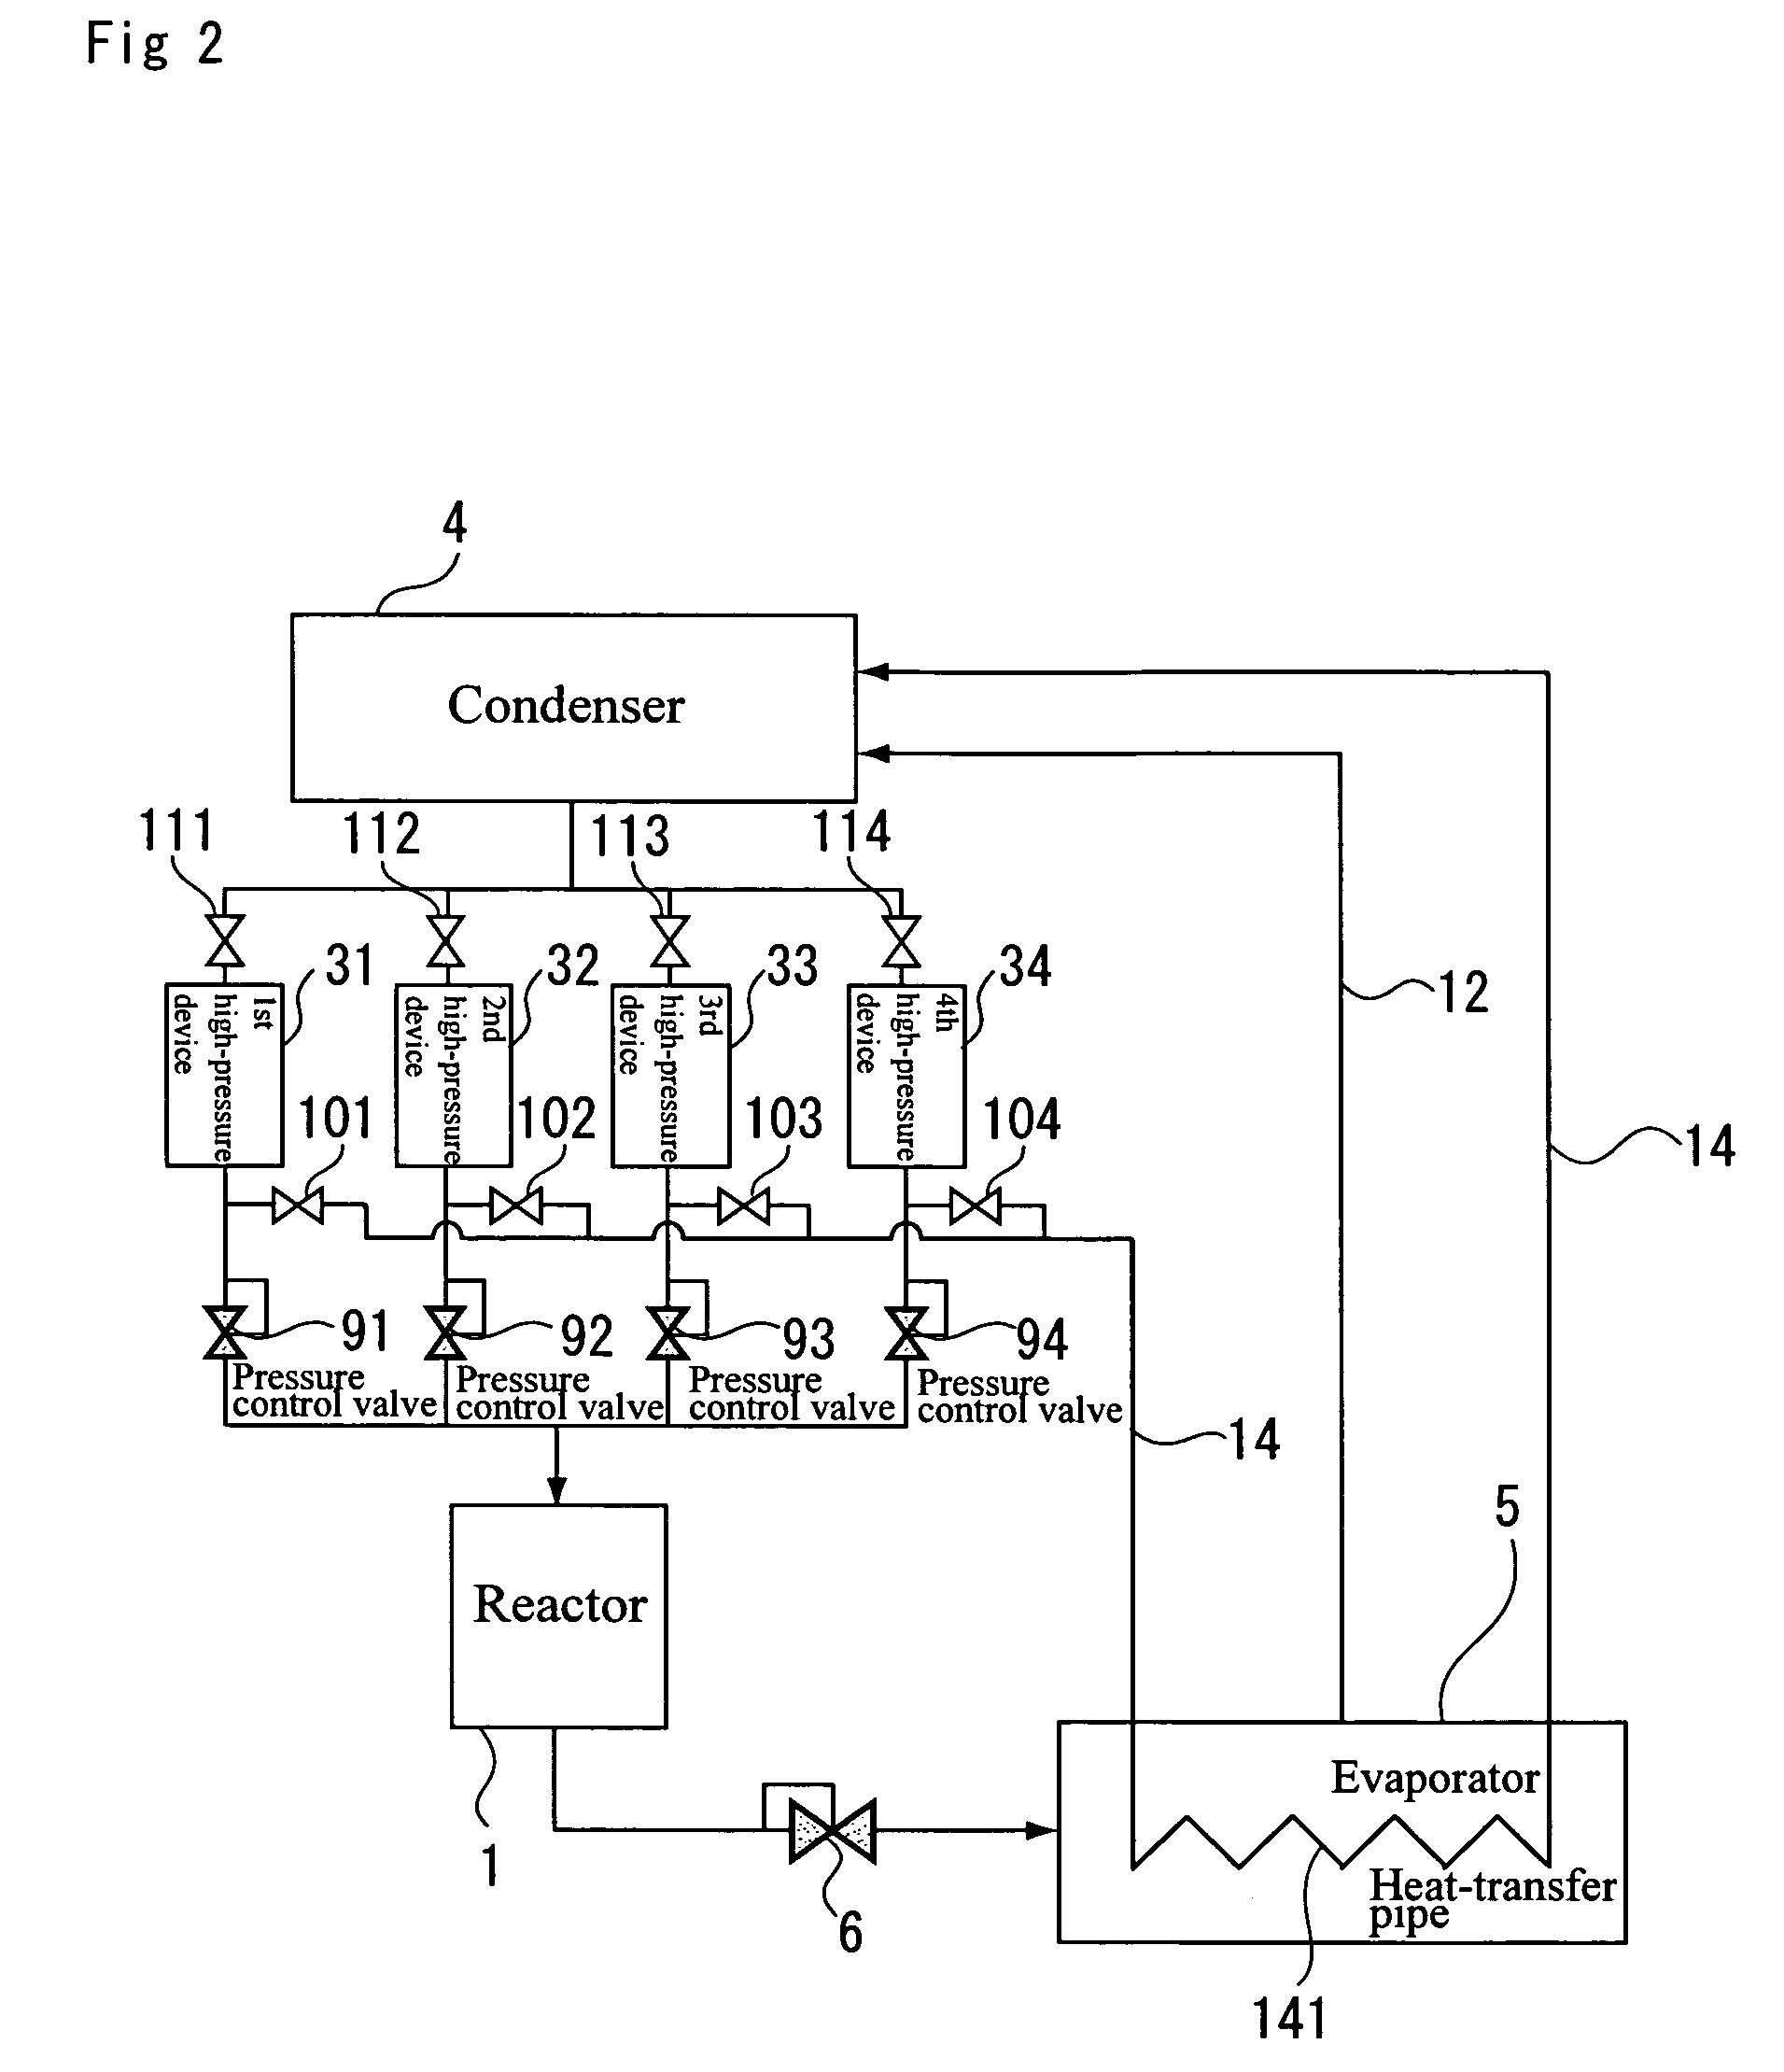 System and device for processing supercritical and subcritical fluid